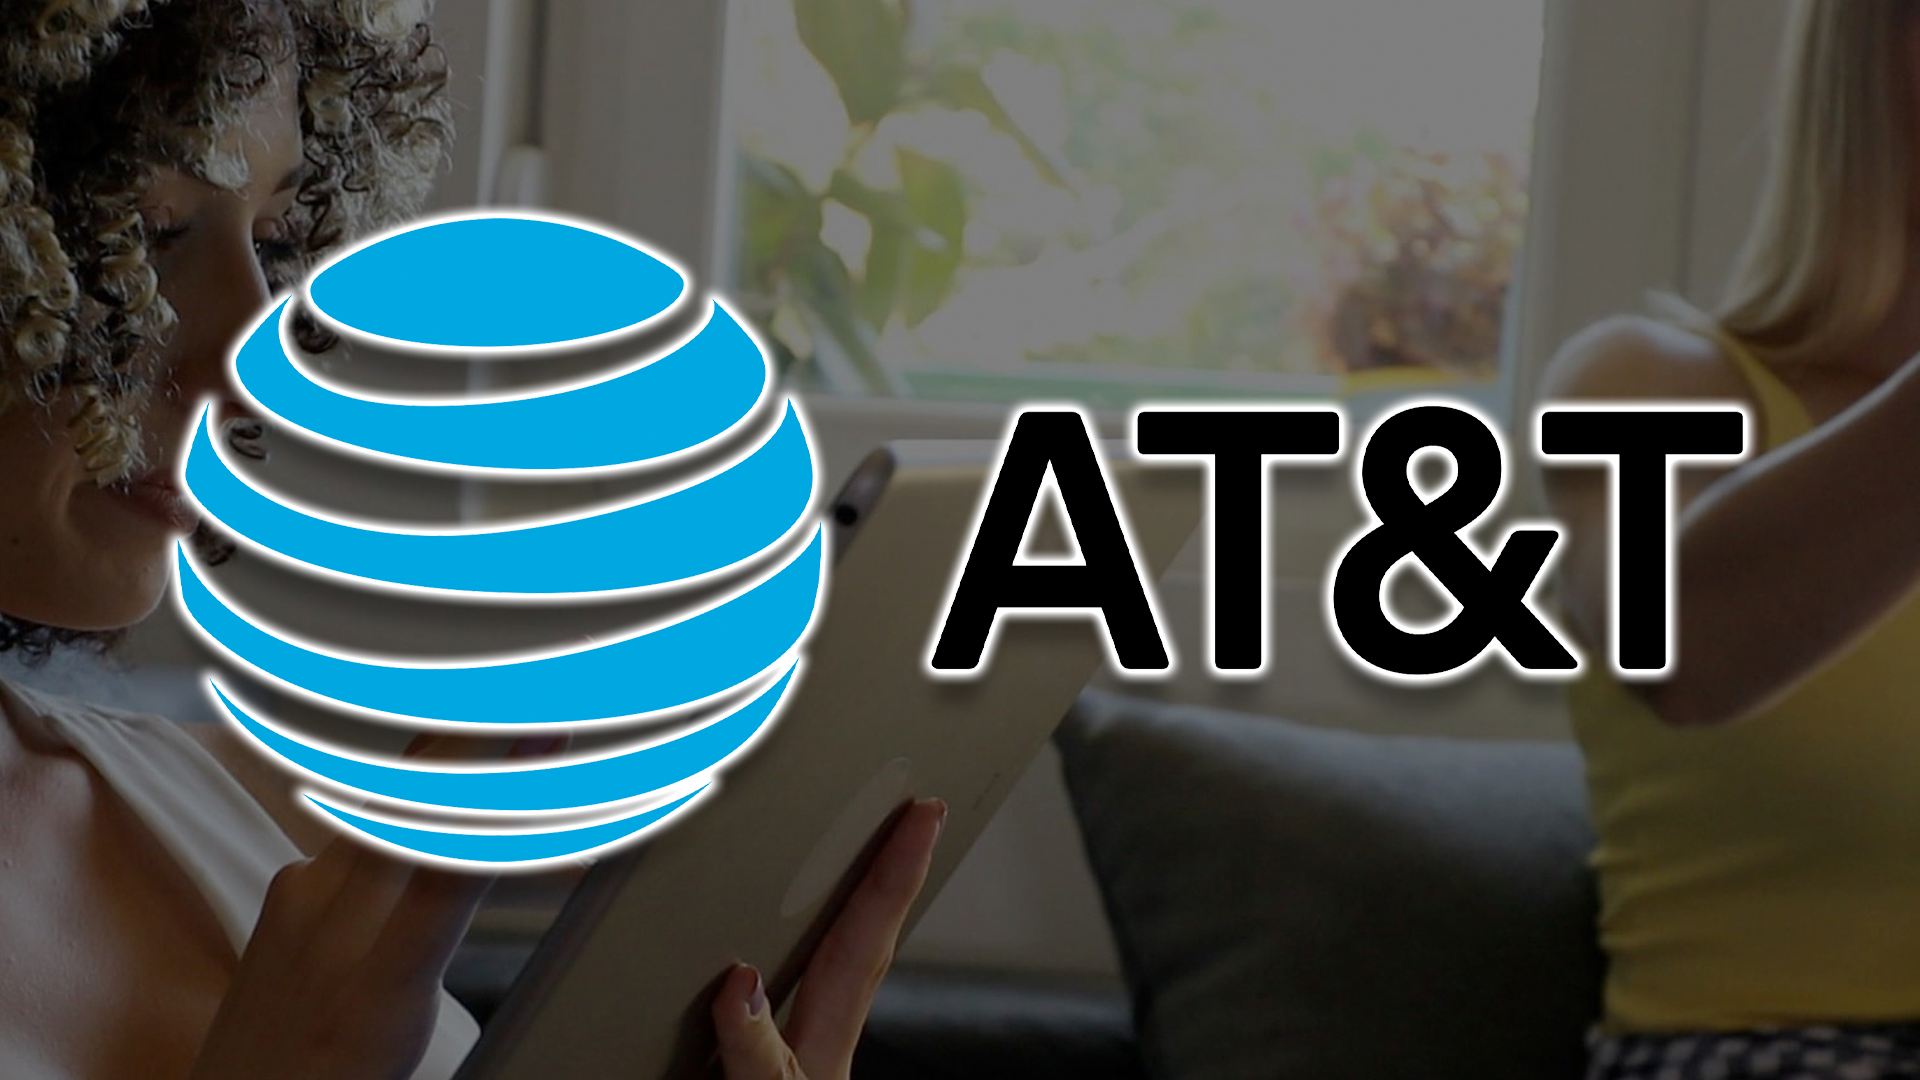 #AT&T’s New 5G Home Internet Service Is ”Internet Air”